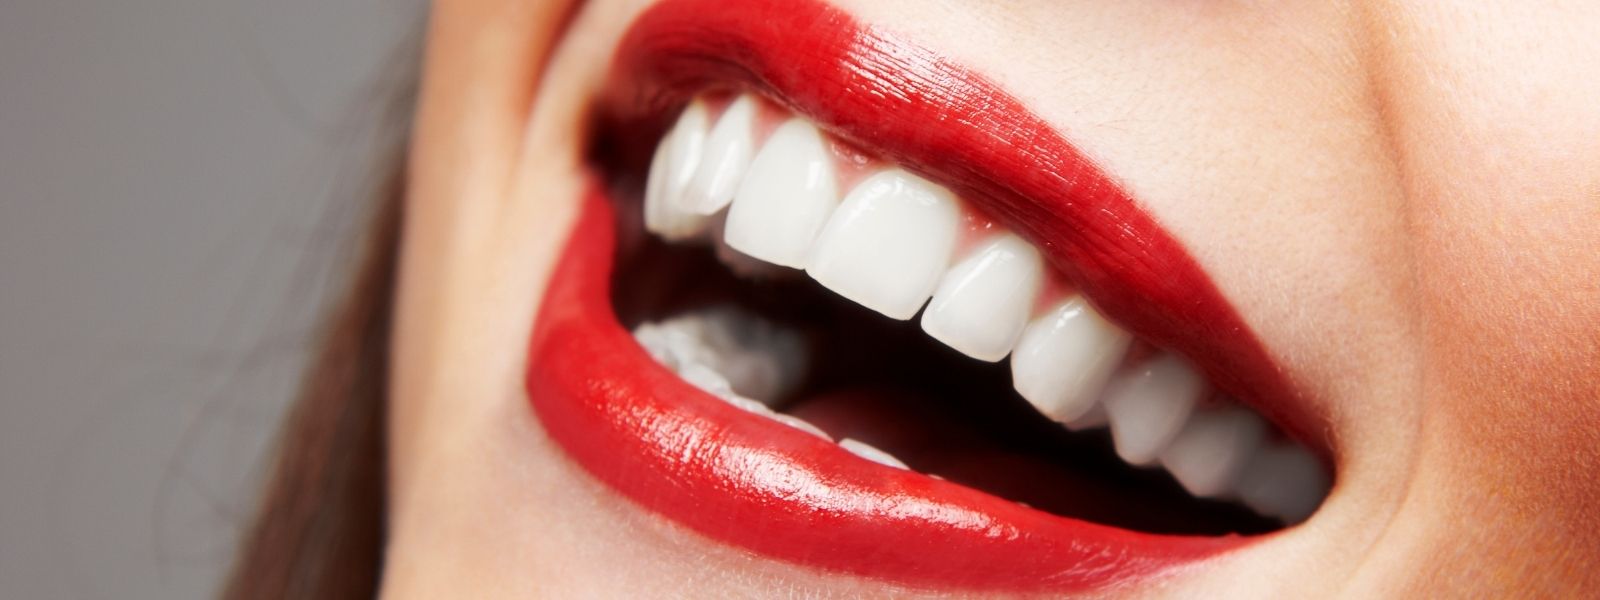 Girl with red lips and white teeth smiling.